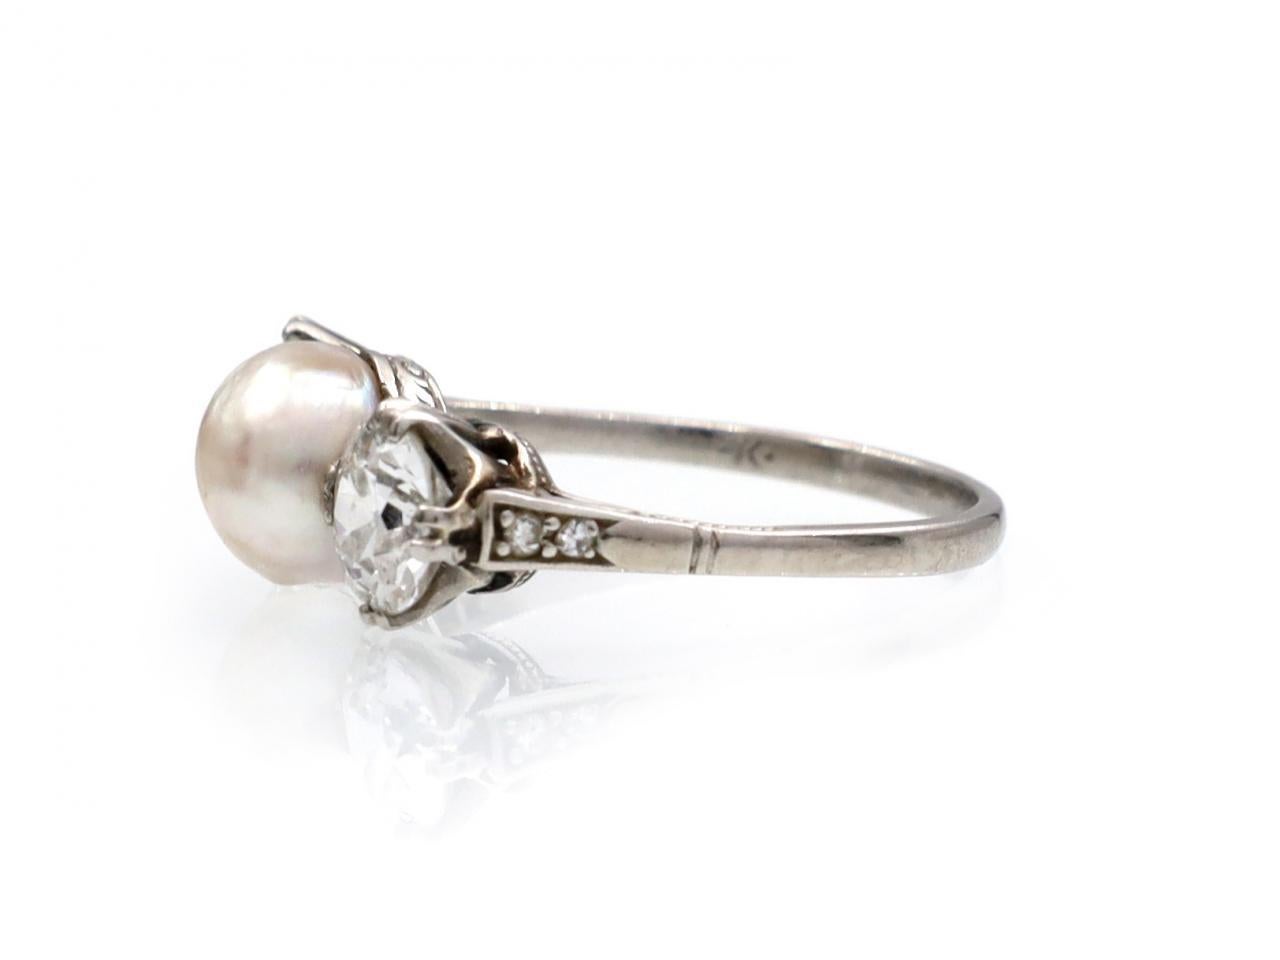 Edwardian natural pearl and diamond three stone ring in platinum. Centred with a natural saltwater pearl flanked to either side with two round Old European cut diamonds in split claw settings, to a three stone design with curving claws, engraved